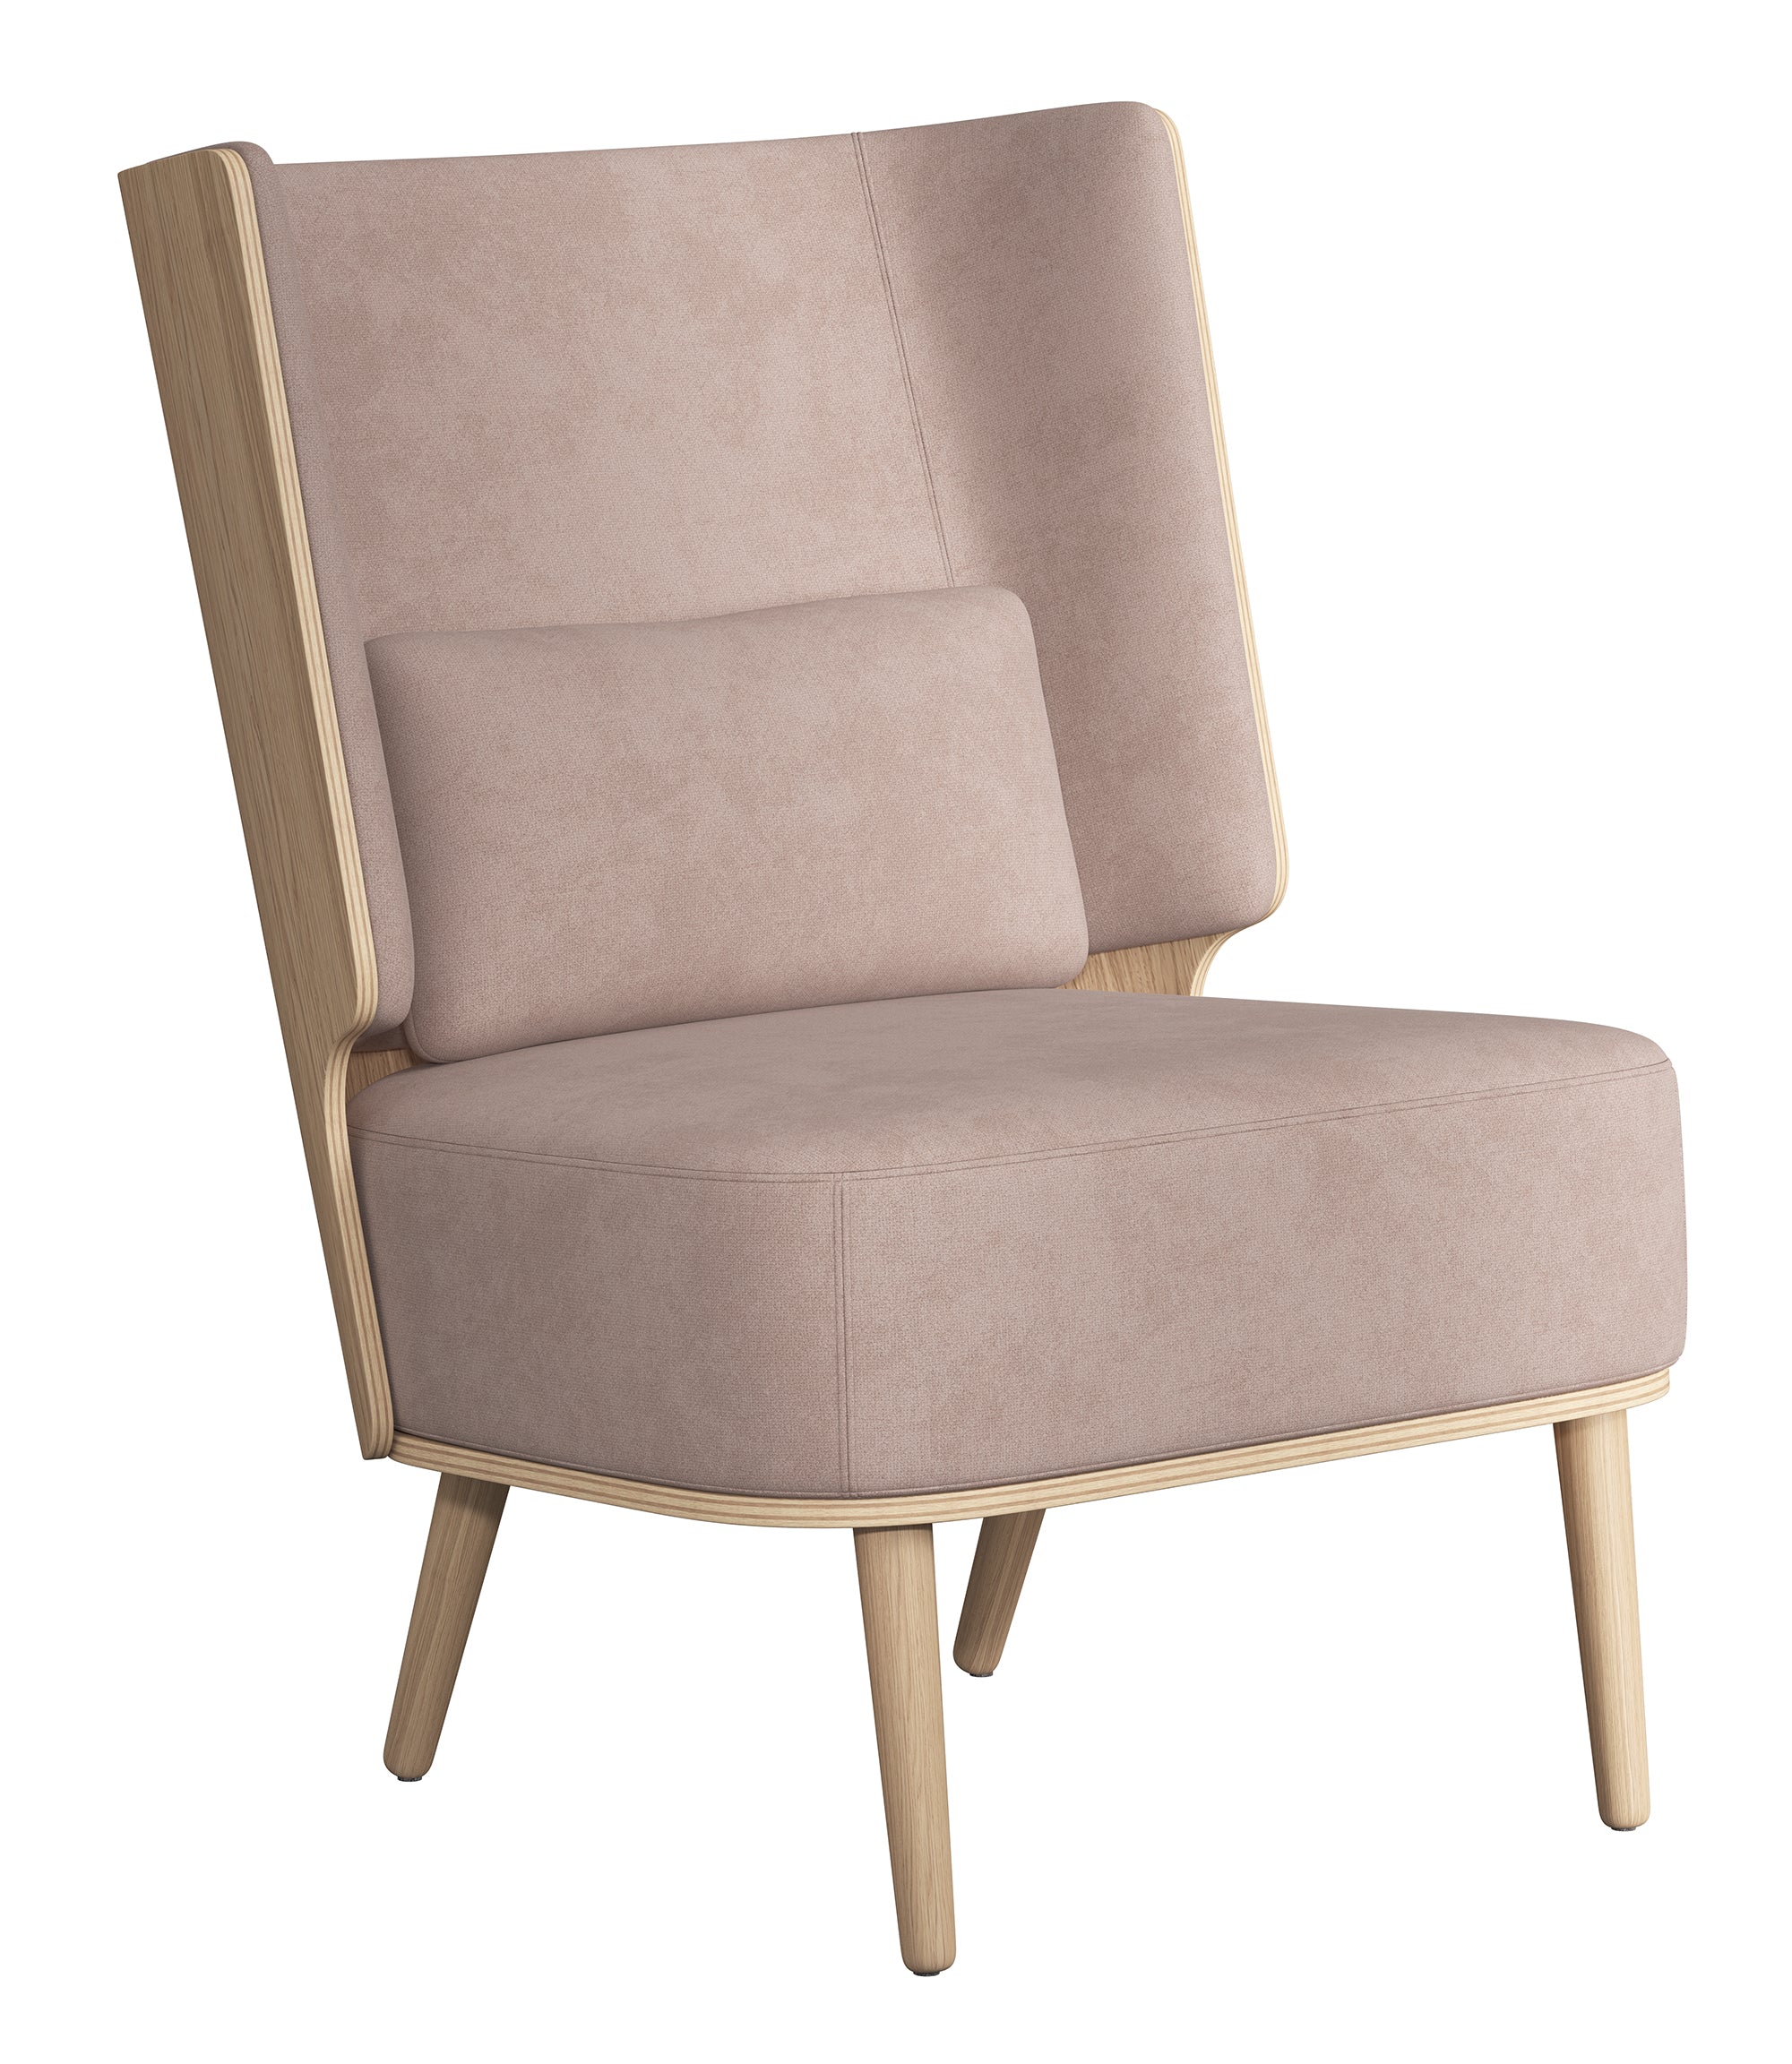 SERENA lounge chair - natural oak/dusty rose